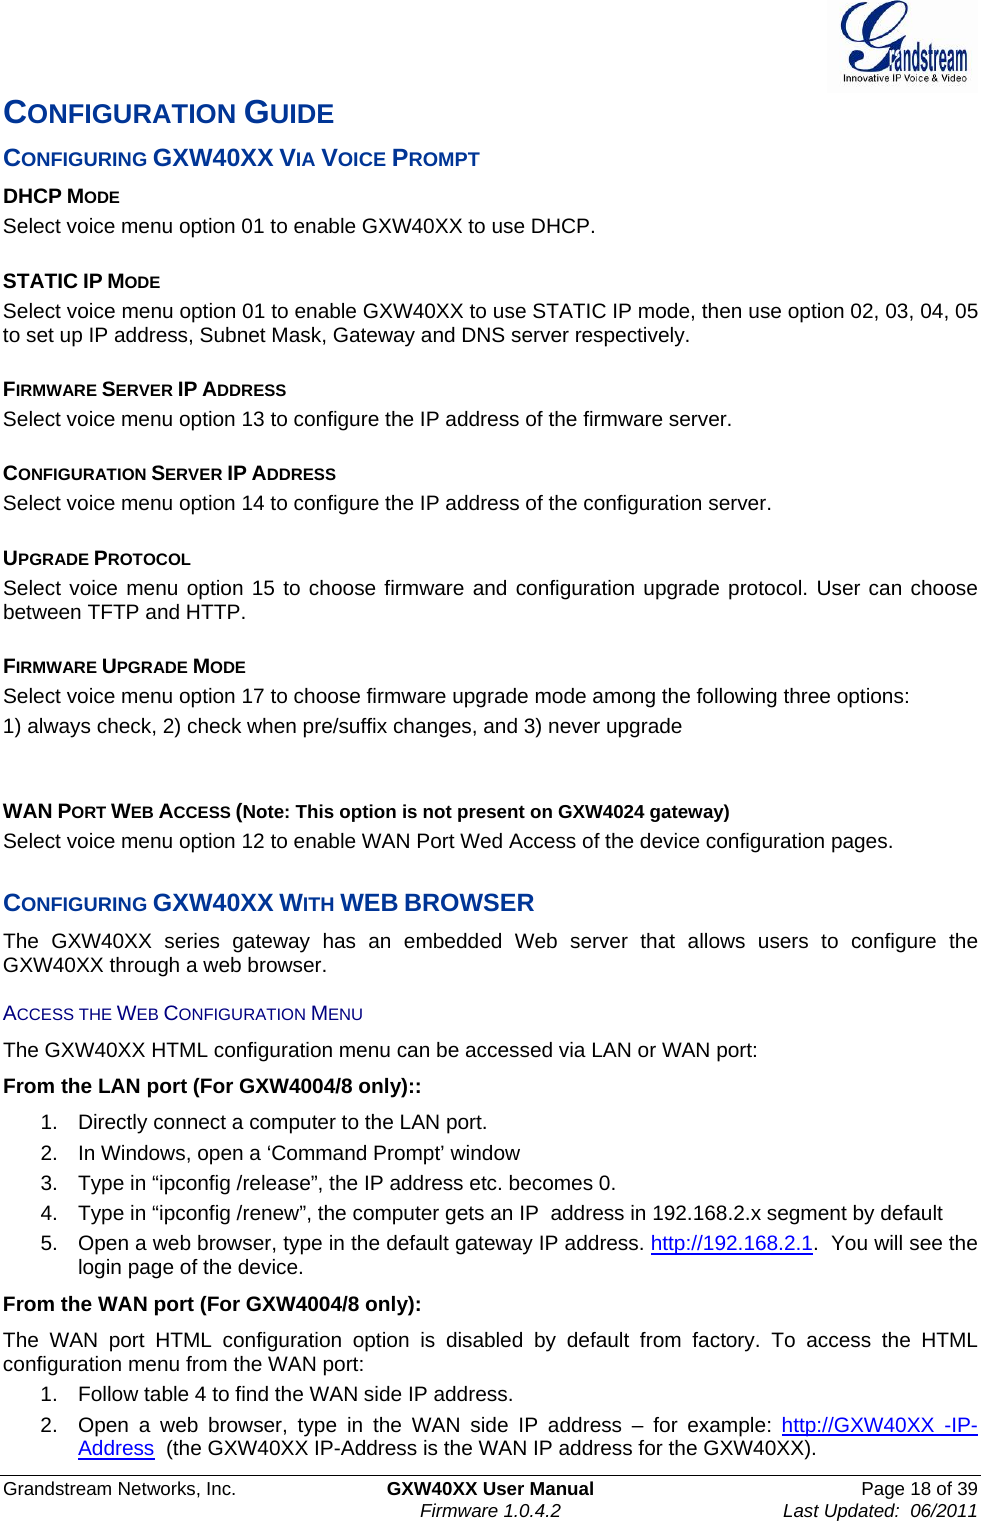  Grandstream Networks, Inc.  GXW40XX User Manual  Page 18 of 39    Firmware 1.0.4.2  Last Updated:  06/2011  CONFIGURATION GUIDE CONFIGURING GXW40XX VIA VOICE PROMPT DHCP MODE Select voice menu option 01 to enable GXW40XX to use DHCP.  STATIC IP MODE  Select voice menu option 01 to enable GXW40XX to use STATIC IP mode, then use option 02, 03, 04, 05 to set up IP address, Subnet Mask, Gateway and DNS server respectively.  FIRMWARE SERVER IP ADDRESS  Select voice menu option 13 to configure the IP address of the firmware server.   CONFIGURATION SERVER IP ADDRESS  Select voice menu option 14 to configure the IP address of the configuration server.   UPGRADE PROTOCOL  Select voice menu option 15 to choose firmware and configuration upgrade protocol. User can choose between TFTP and HTTP.  FIRMWARE UPGRADE MODE  Select voice menu option 17 to choose firmware upgrade mode among the following three options:  1) always check, 2) check when pre/suffix changes, and 3) never upgrade   WAN PORT WEB ACCESS (Note: This option is not present on GXW4024 gateway) Select voice menu option 12 to enable WAN Port Wed Access of the device configuration pages.  CONFIGURING GXW40XX WITH WEB BROWSER The GXW40XX series gateway has an embedded Web server that allows users to configure the GXW40XX through a web browser.  ACCESS THE WEB CONFIGURATION MENU The GXW40XX HTML configuration menu can be accessed via LAN or WAN port:  From the LAN port (For GXW4004/8 only):: 1.  Directly connect a computer to the LAN port.  2.  In Windows, open a ‘Command Prompt’ window 3.  Type in “ipconfig /release”, the IP address etc. becomes 0. 4.  Type in “ipconfig /renew”, the computer gets an IP  address in 192.168.2.x segment by default 5.  Open a web browser, type in the default gateway IP address. http://192.168.2.1.  You will see the login page of the device. From the WAN port (For GXW4004/8 only): The WAN port HTML configuration option is disabled by default from factory. To access the HTML configuration menu from the WAN port: 1.  Follow table 4 to find the WAN side IP address. 2.  Open a web browser, type in the WAN side IP address – for example: http://GXW40XX -IP-Address  (the GXW40XX IP-Address is the WAN IP address for the GXW40XX). 